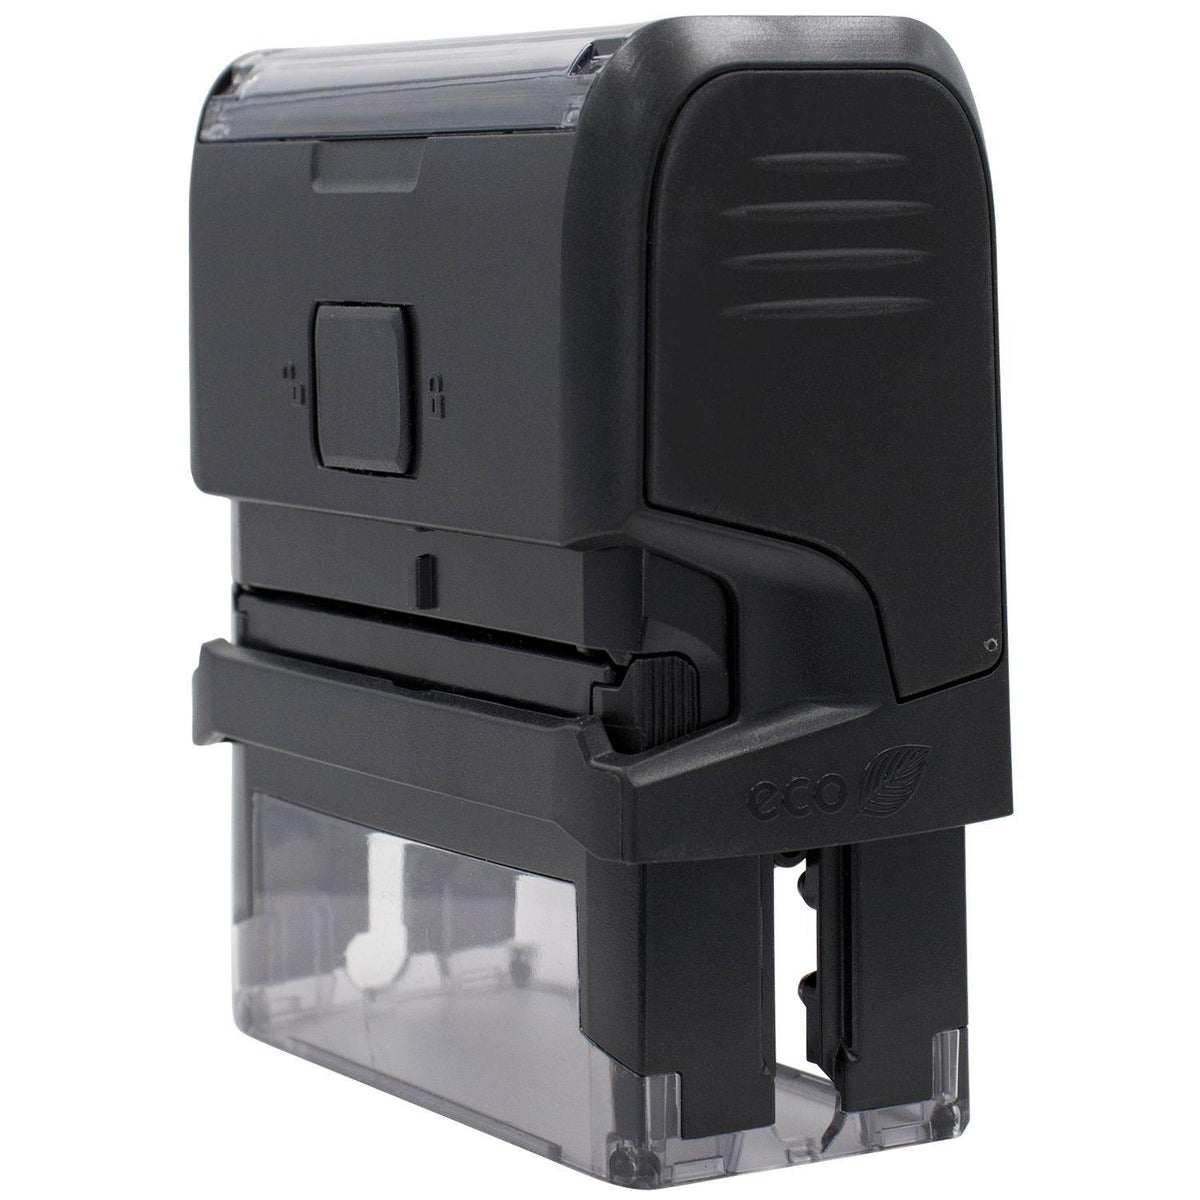 Side View of Large Self-Inking Bold File Stamp at an Angle